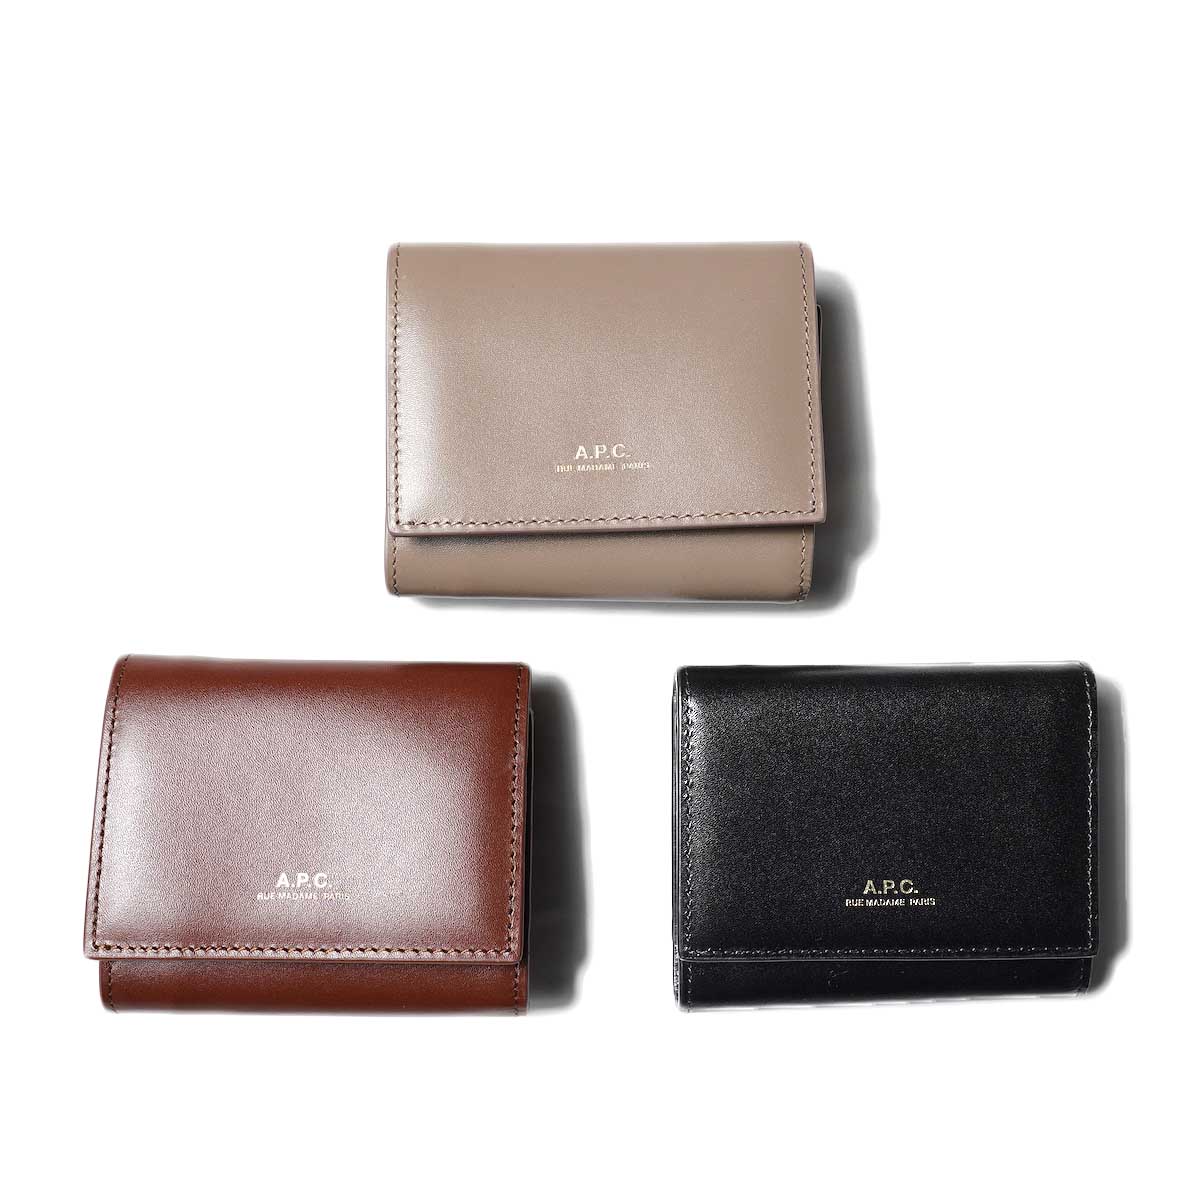 A.P.C. / Lois Small Compact Wallet